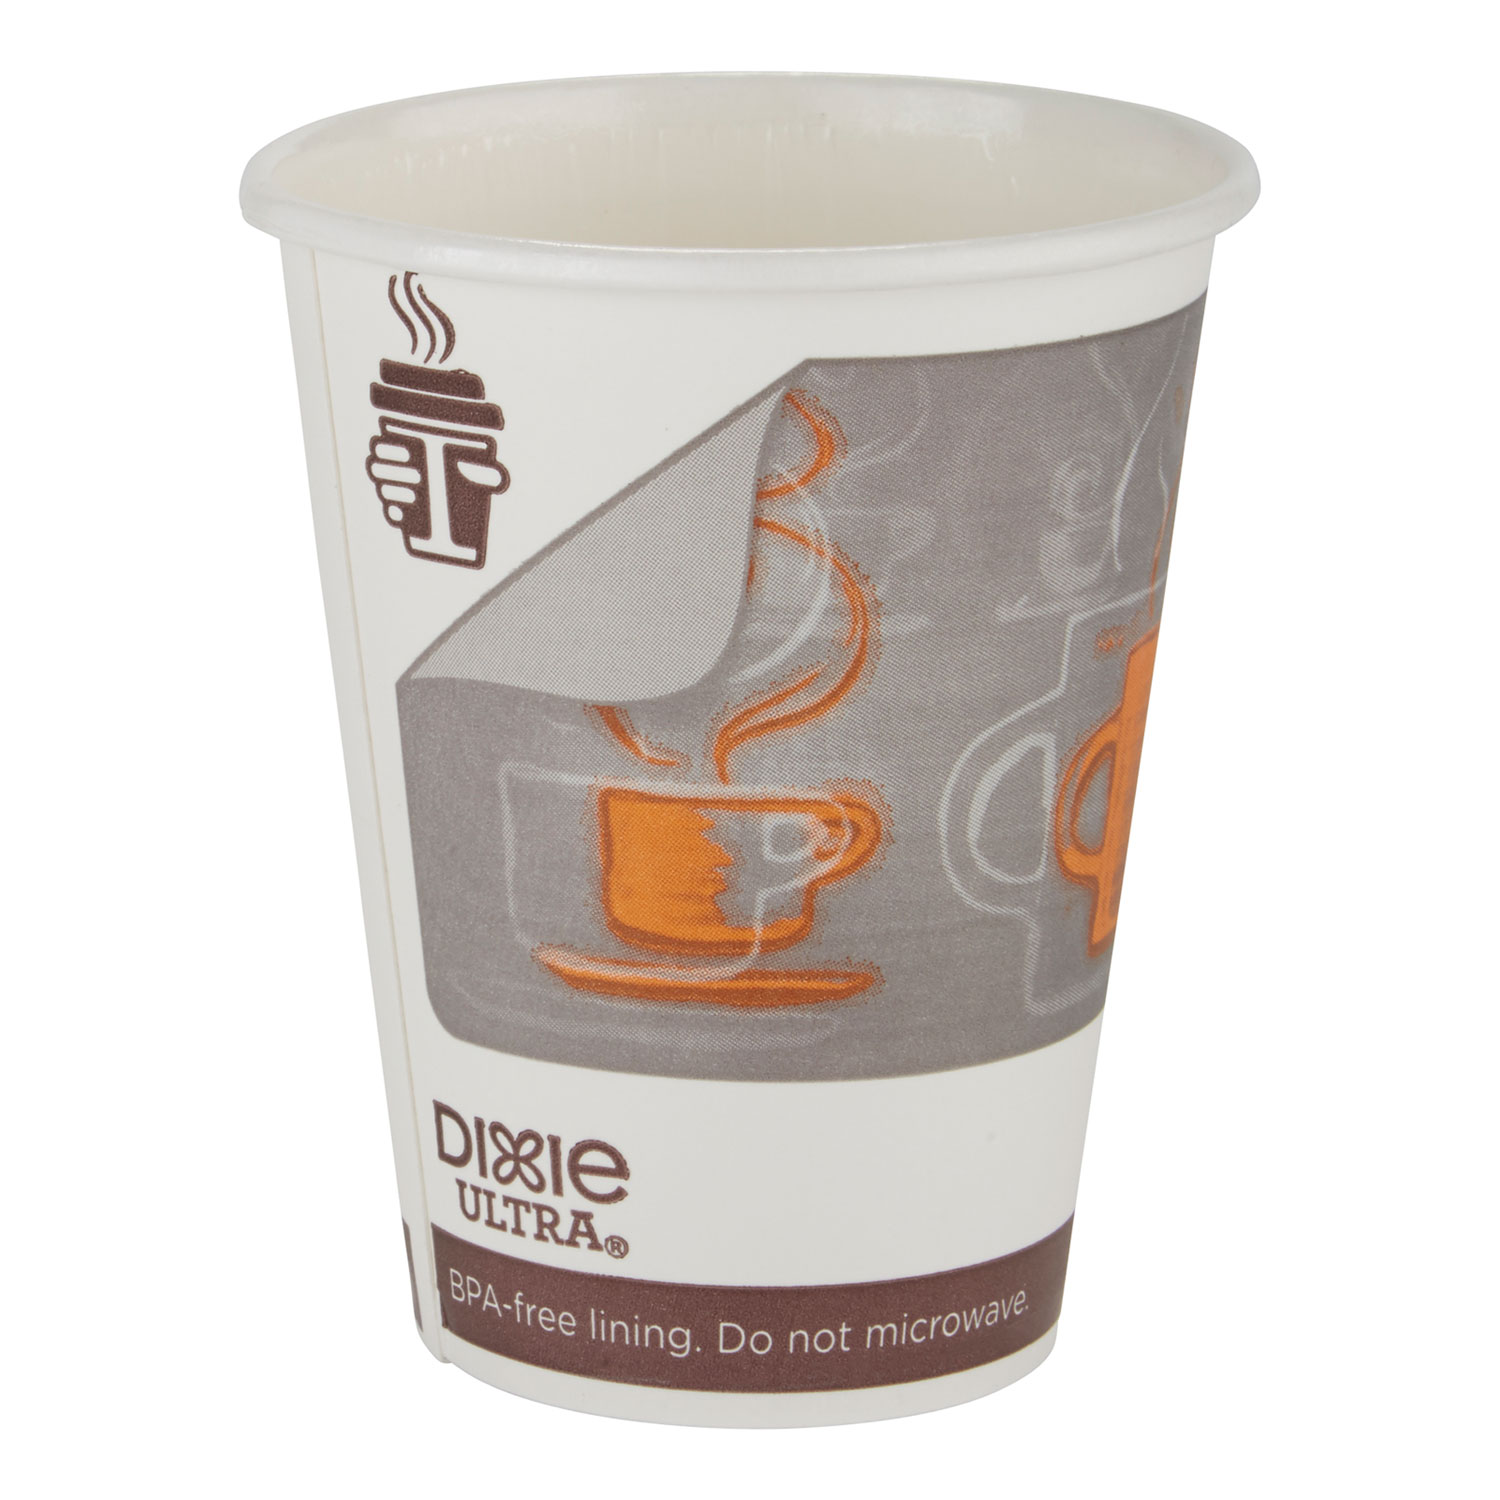  Georgia Pacific Professional 6342AR Dixie Ultra Insulair Paper Hot Cup, 12 oz, Coffee, 50 Cups/Sleeve, 20 Sleeves/CT (DXE6342AR) 